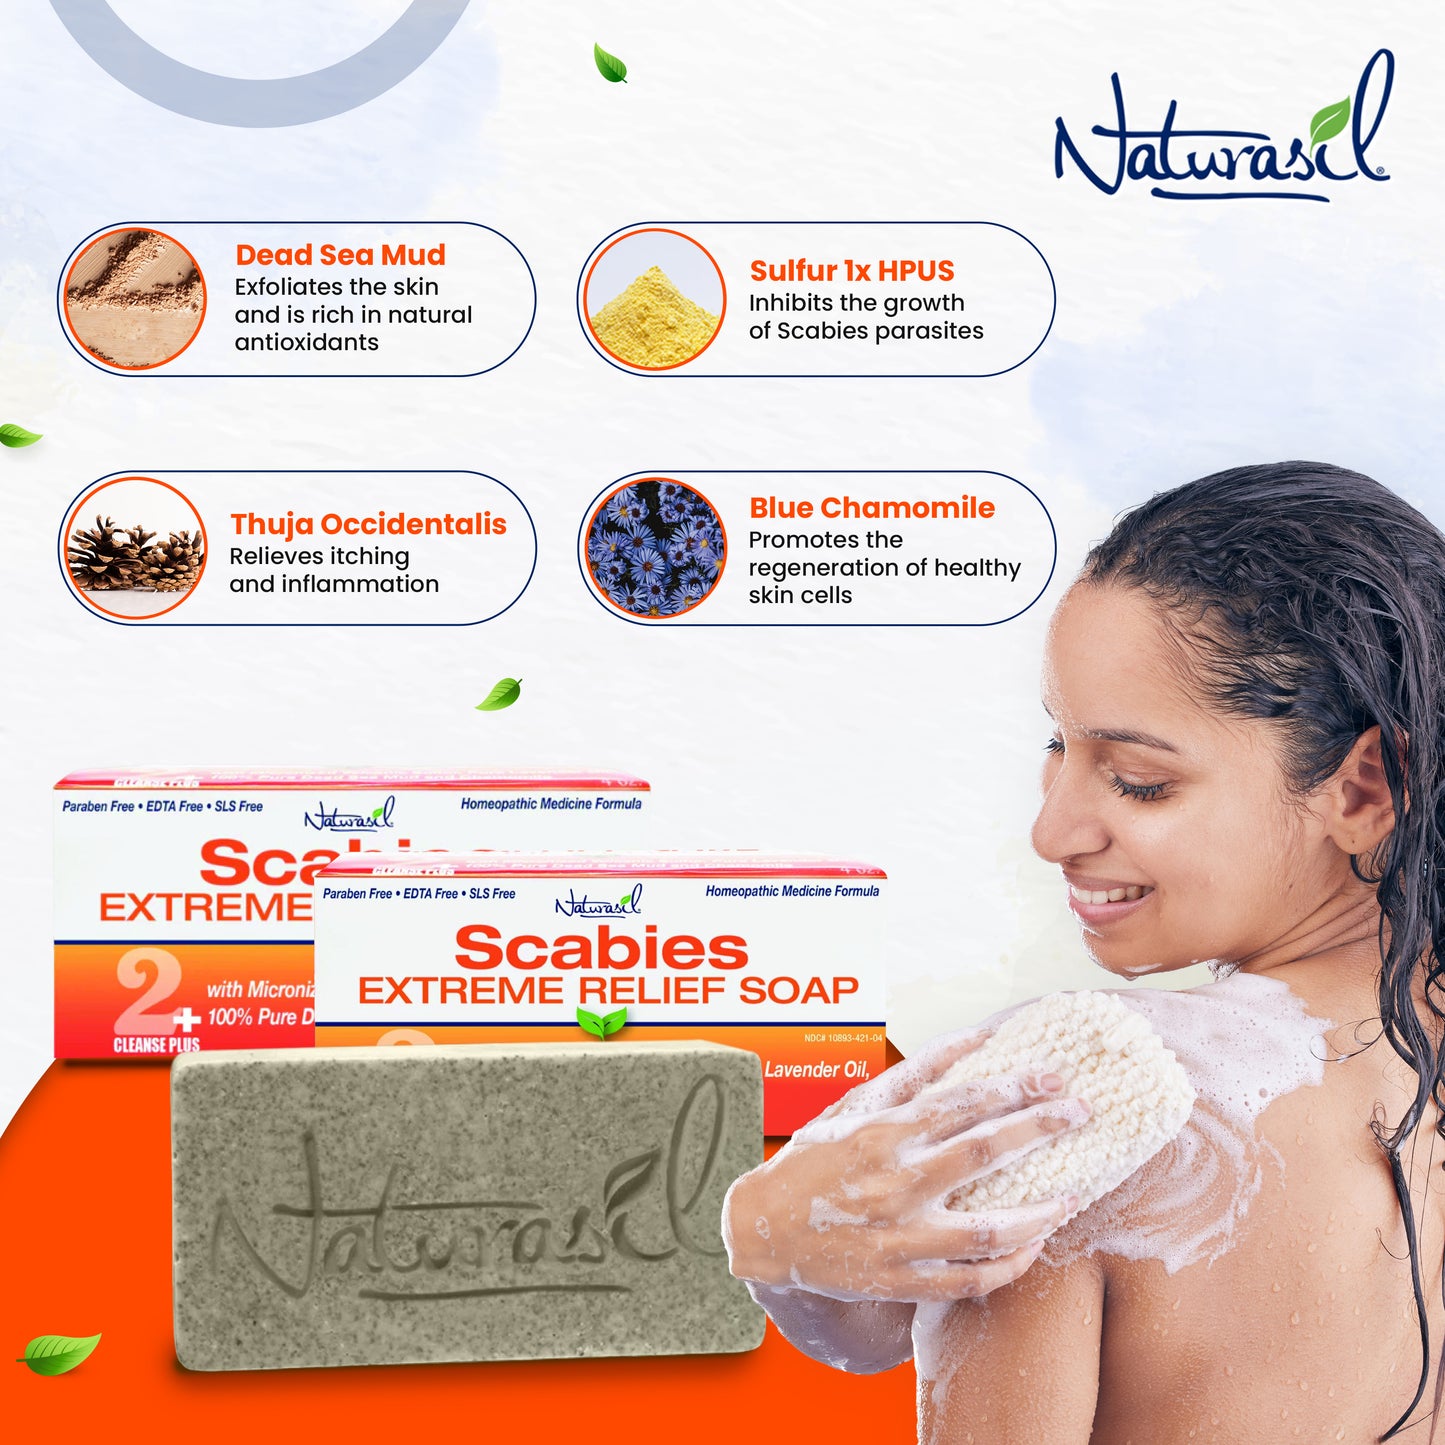 Scabies EXTREME 10% Sulfur 100% Pure Dead Sea Mud Treatment Soap | 2 Pack 4 oz Bars